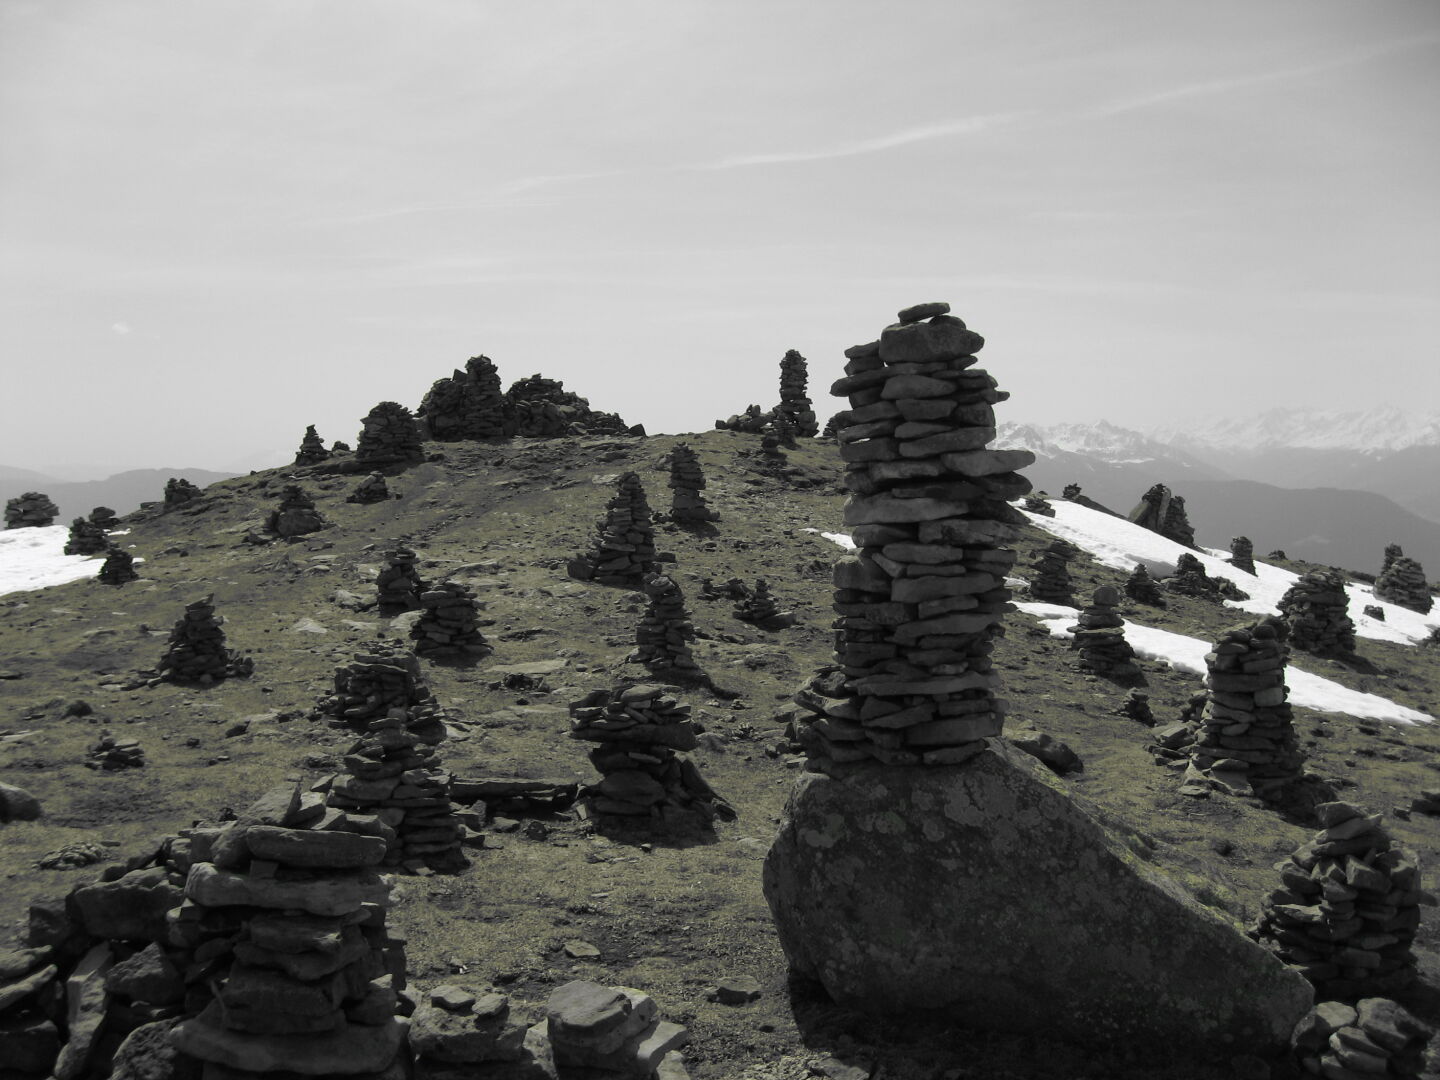 For some reason the camera decided to switch to black and white... this is on top of the &quot;Steinerne Mandeln&quot;, which means &quot;little stone men&quot;.